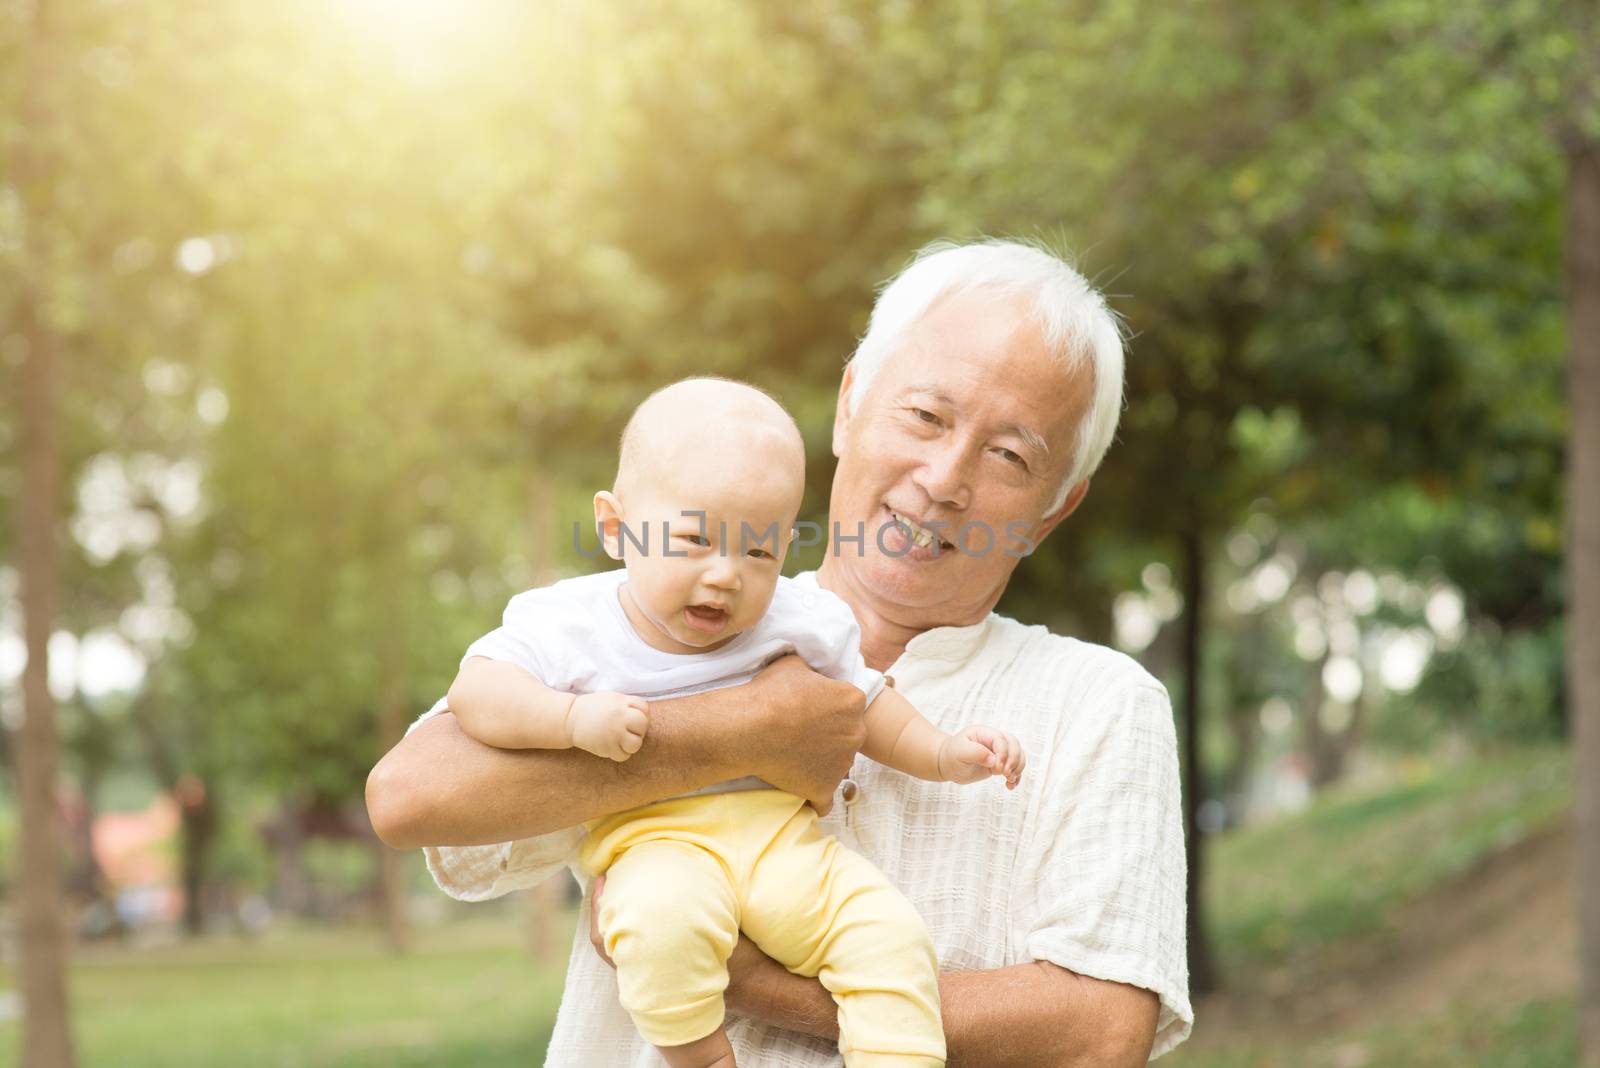 Grandfather with baby grandson at outdoor park, Asian family.